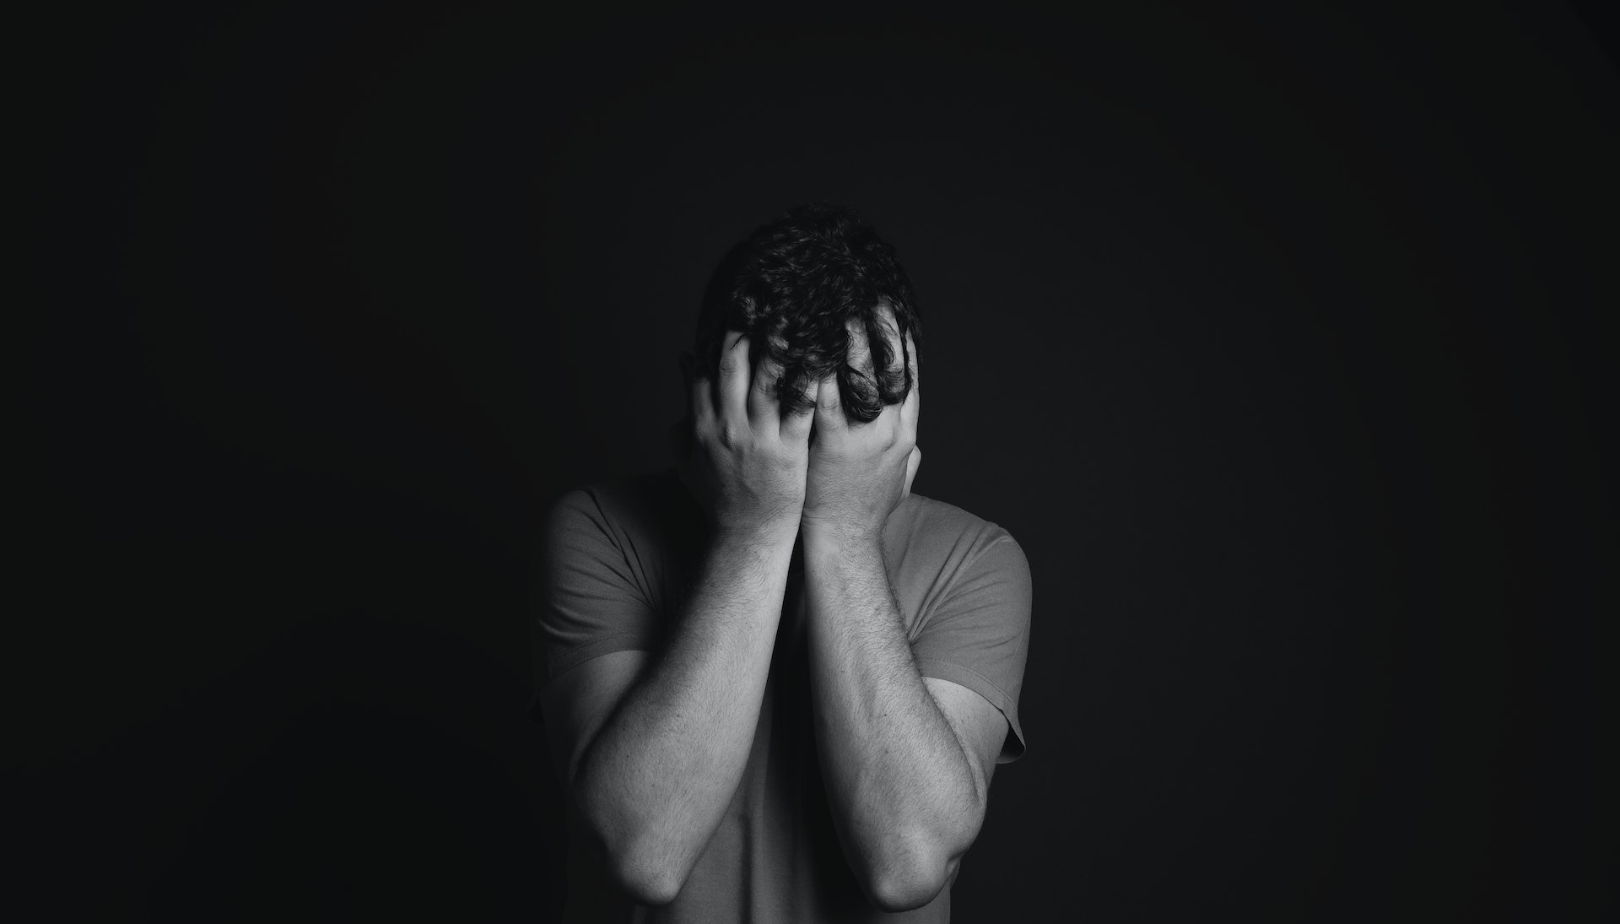 The Link Between Mental Health Struggles and Substance Dependence